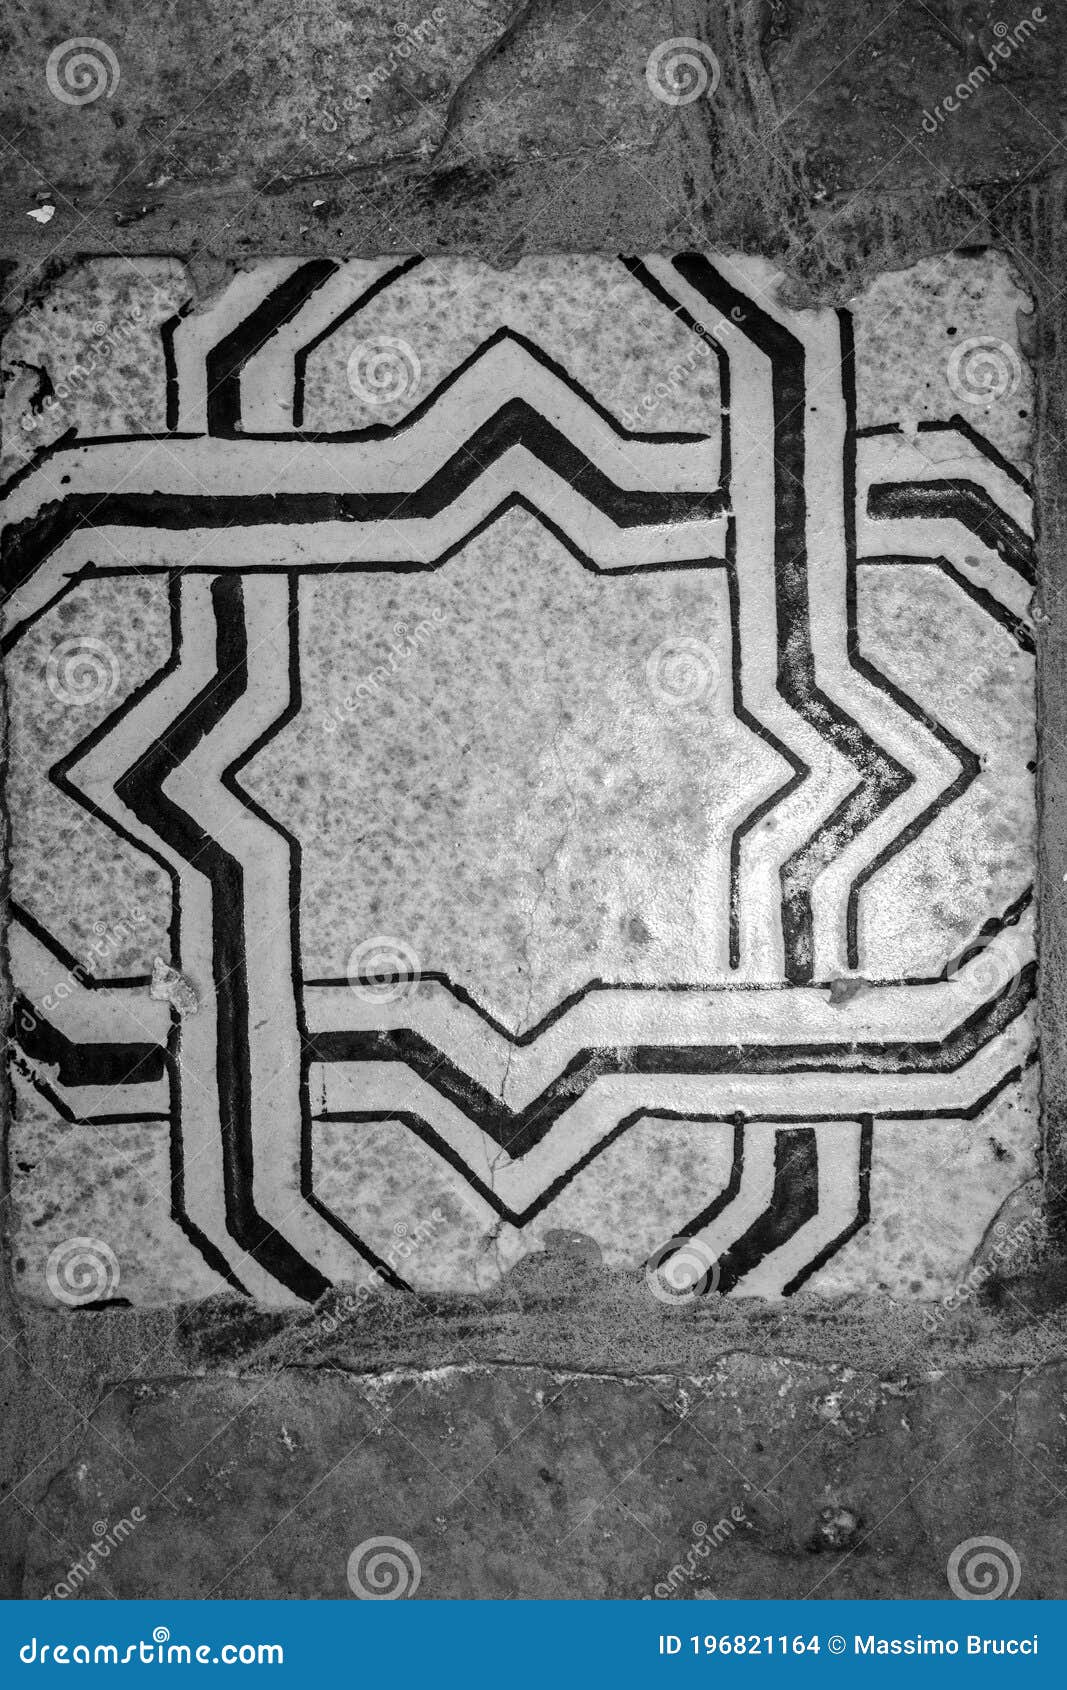 old floor tile in black and white